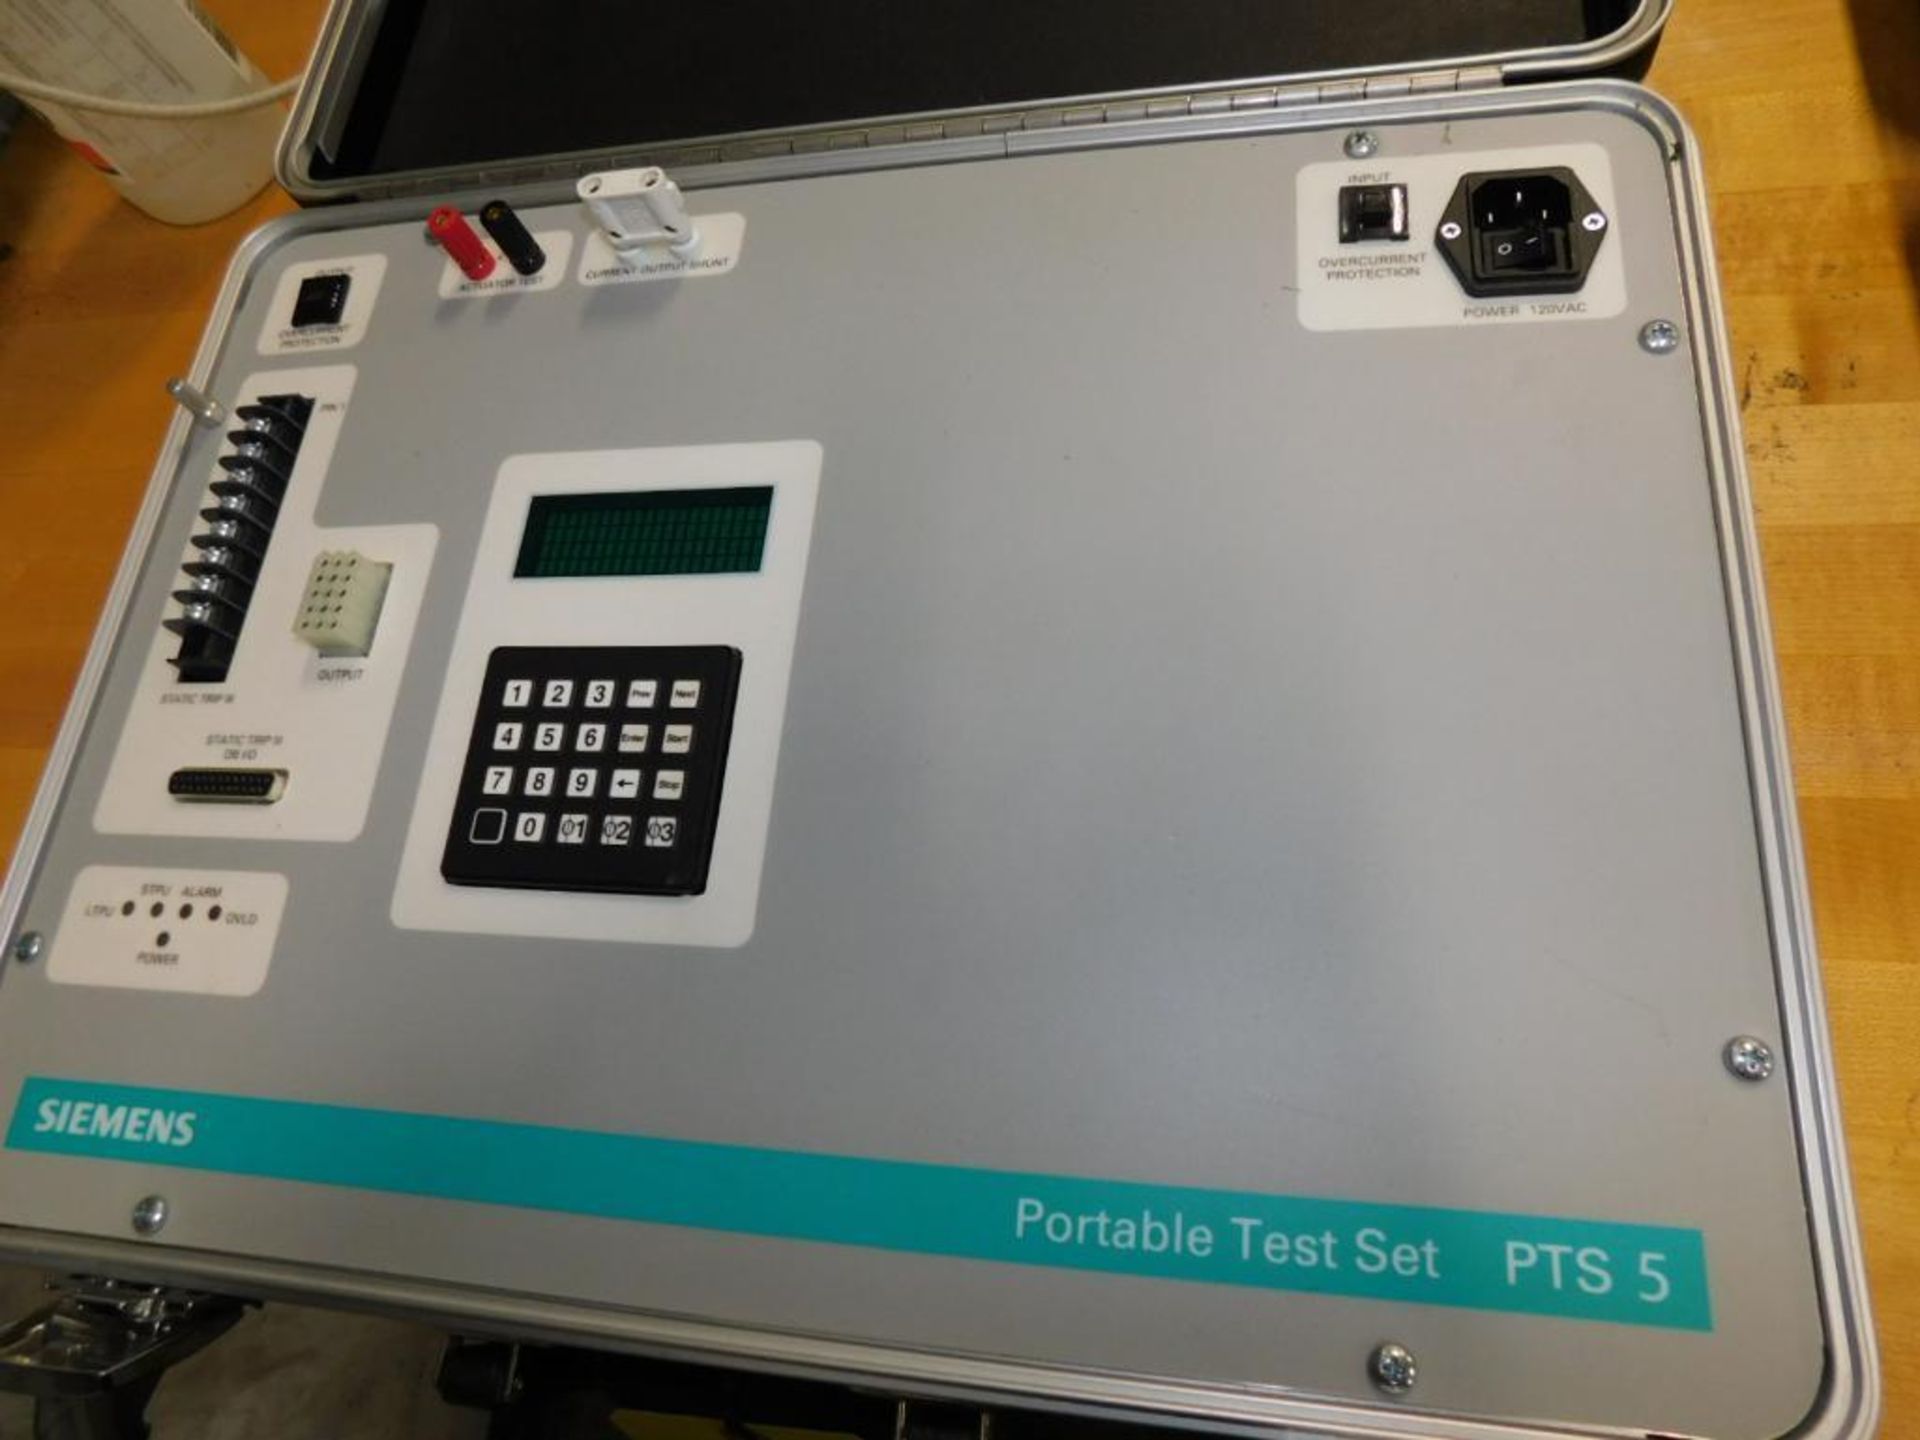 Siemens PTS 5 Portable Test Set (LOCATION: IN MACHINE SHOP, 2ND FLOOR) - Image 2 of 3